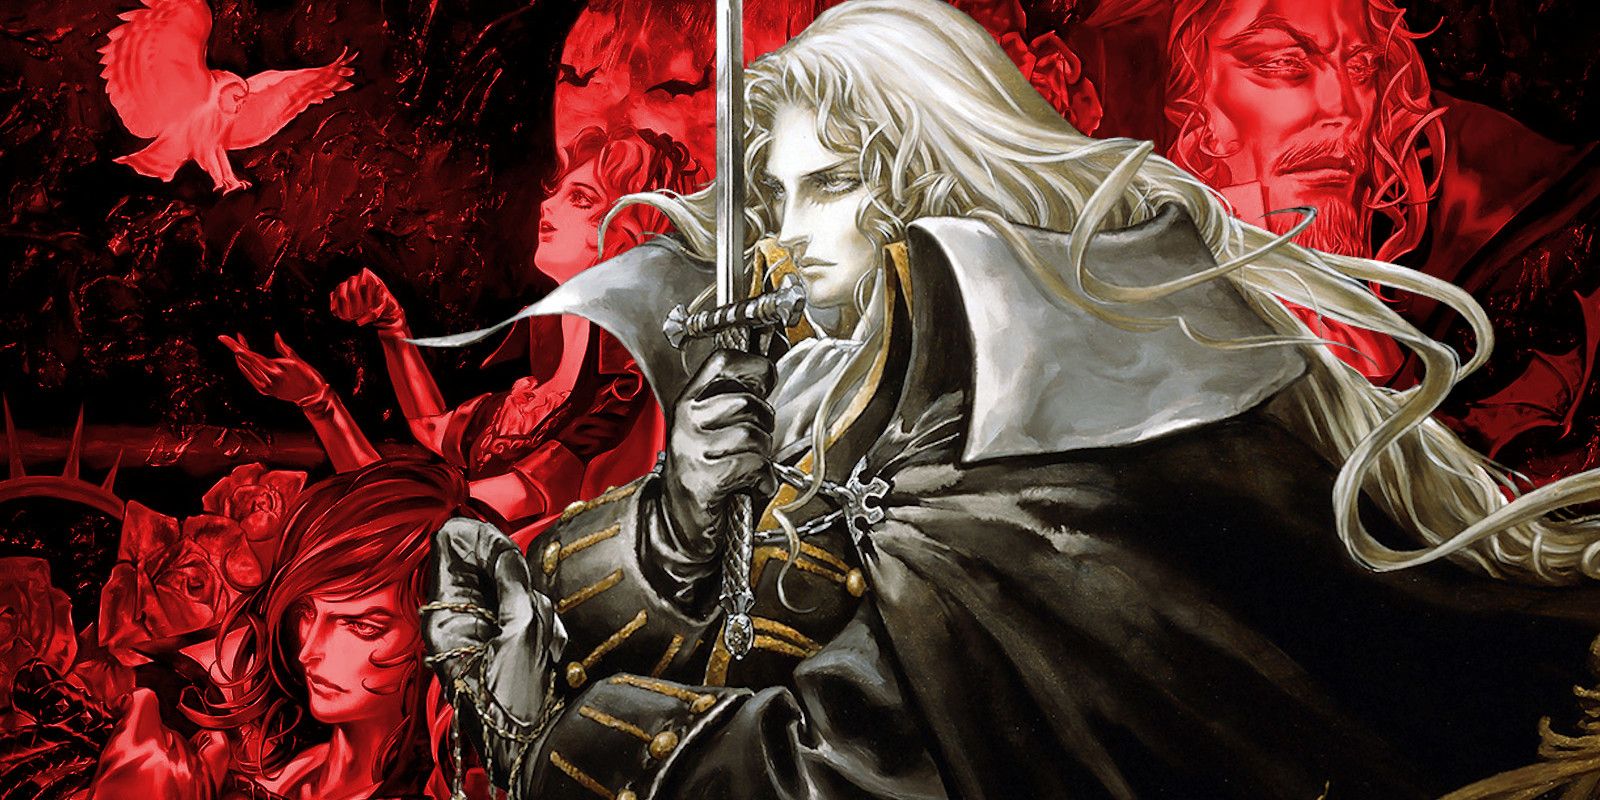 Is Castlevania: Symphony of the Night Worth Playing?